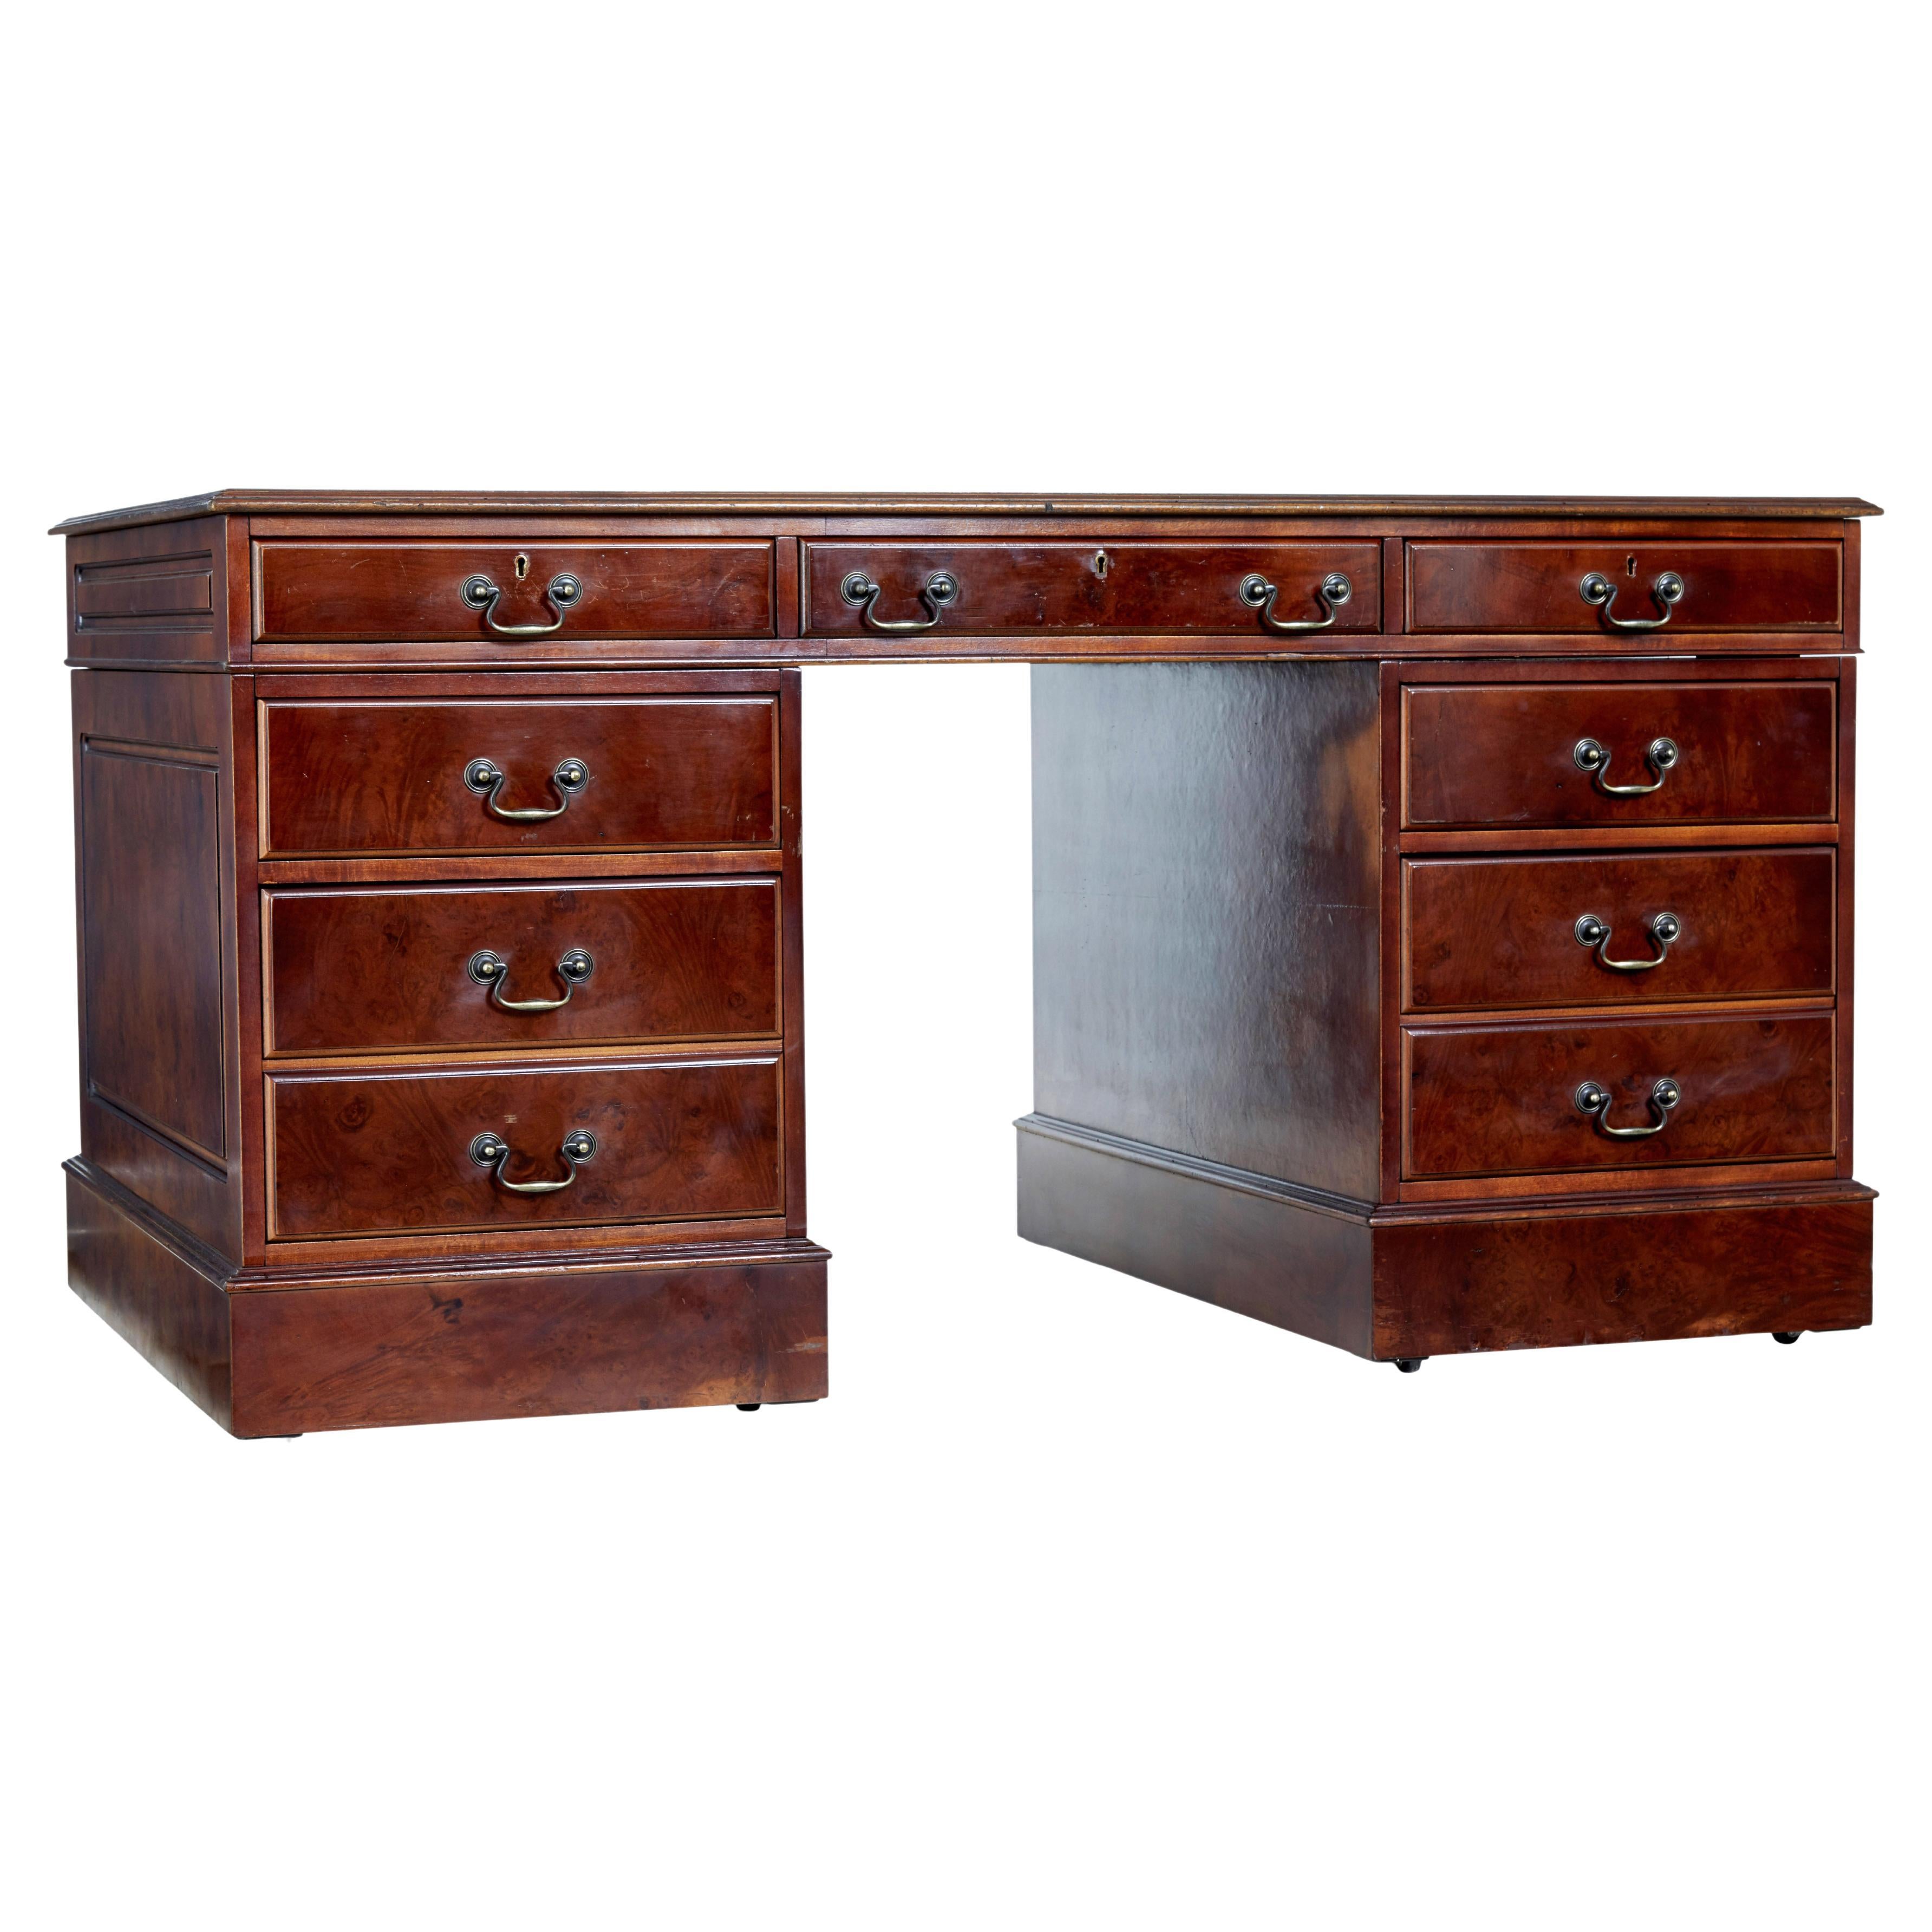 Mahogany and burr leather top pedestal desk For Sale